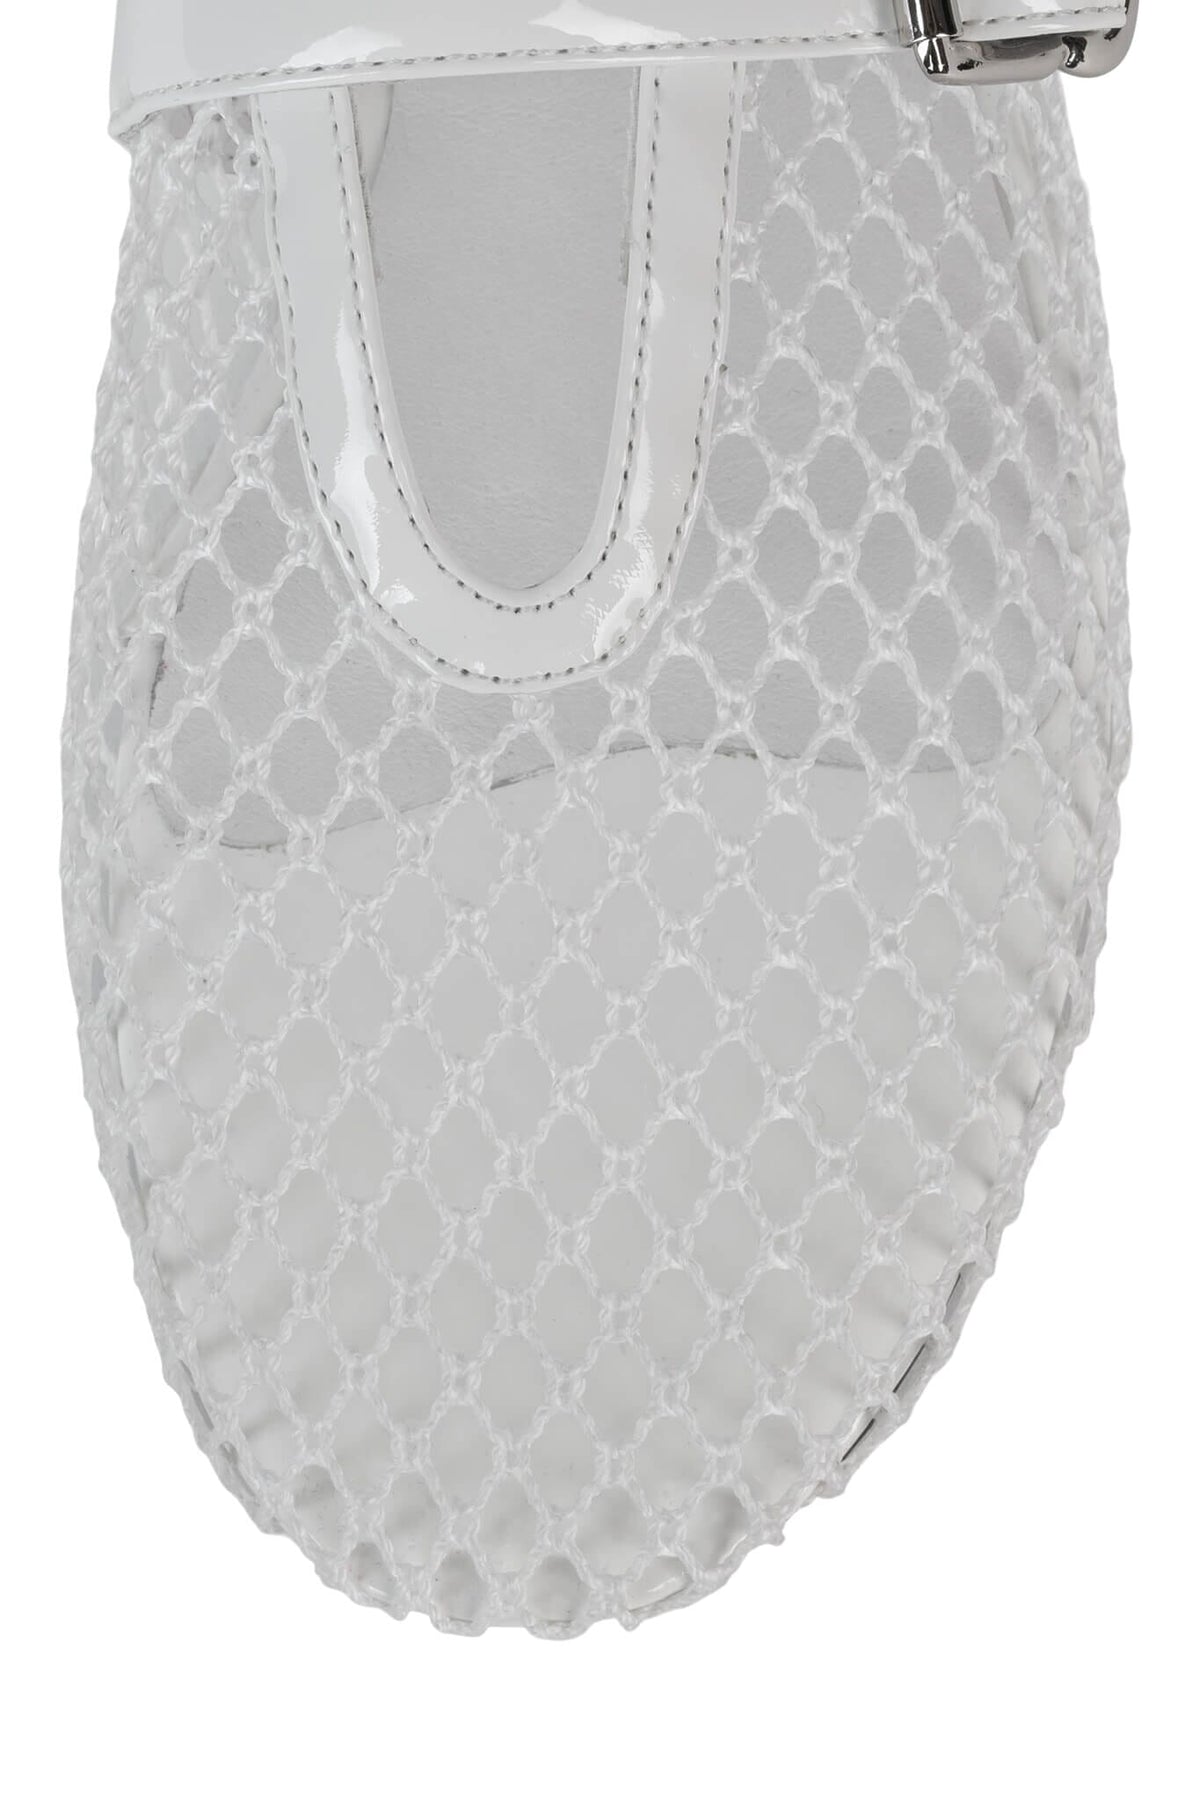 SHELLY-LS2 Mesh Mary-Jane Flats Jeffrey Campbell White Patent Combo Top View